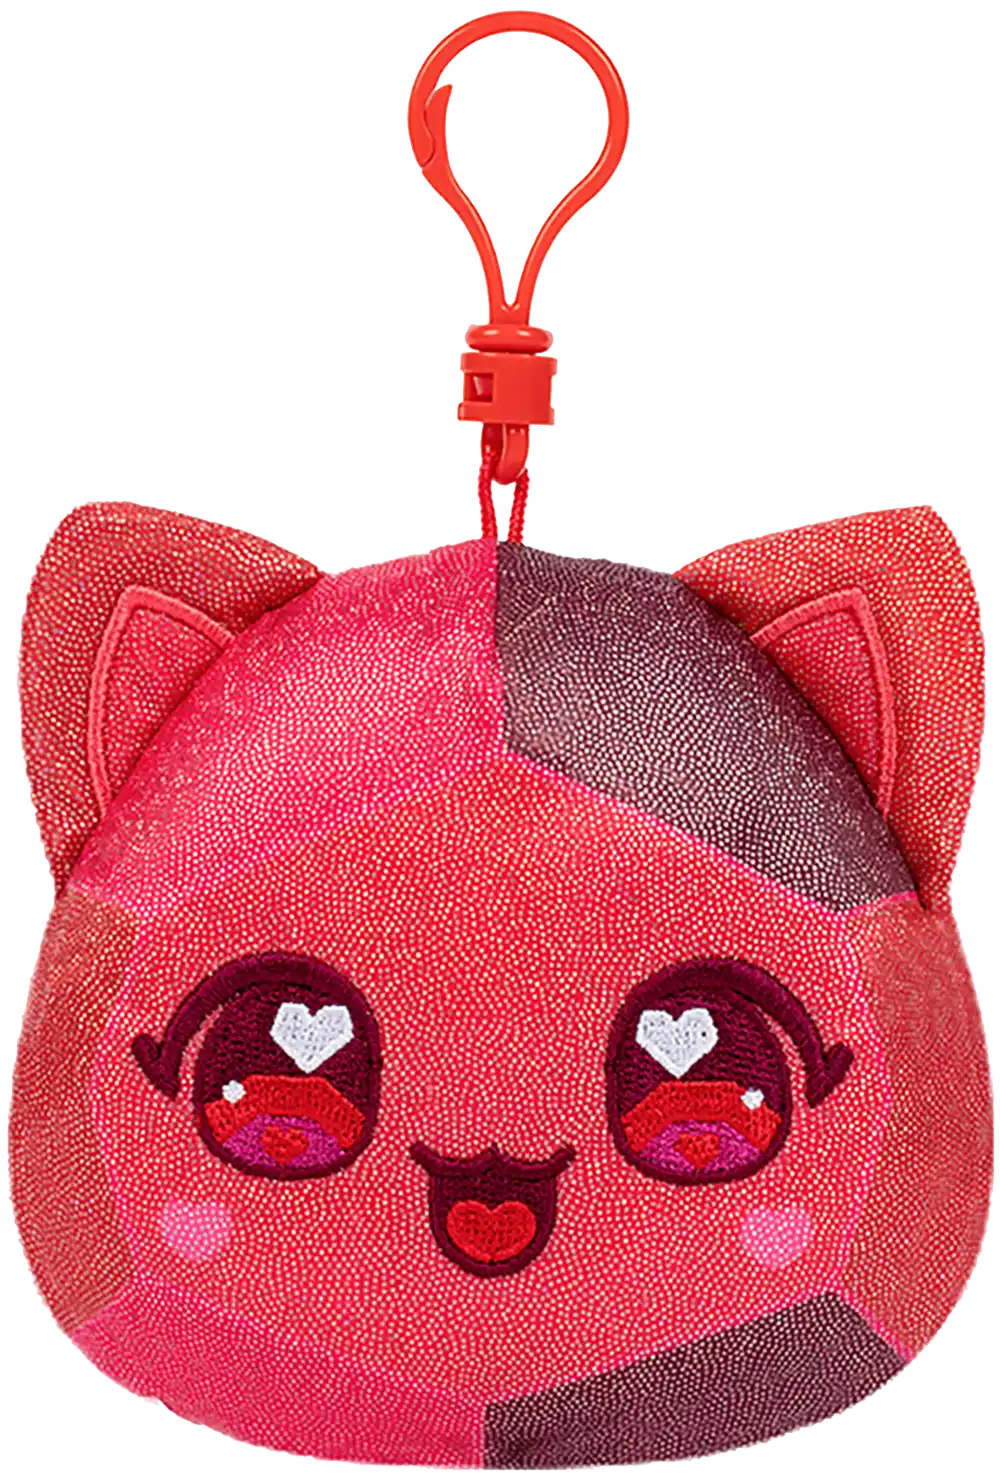 Aphmau MeeMeows Catface Plush Clip On Ruby Cat